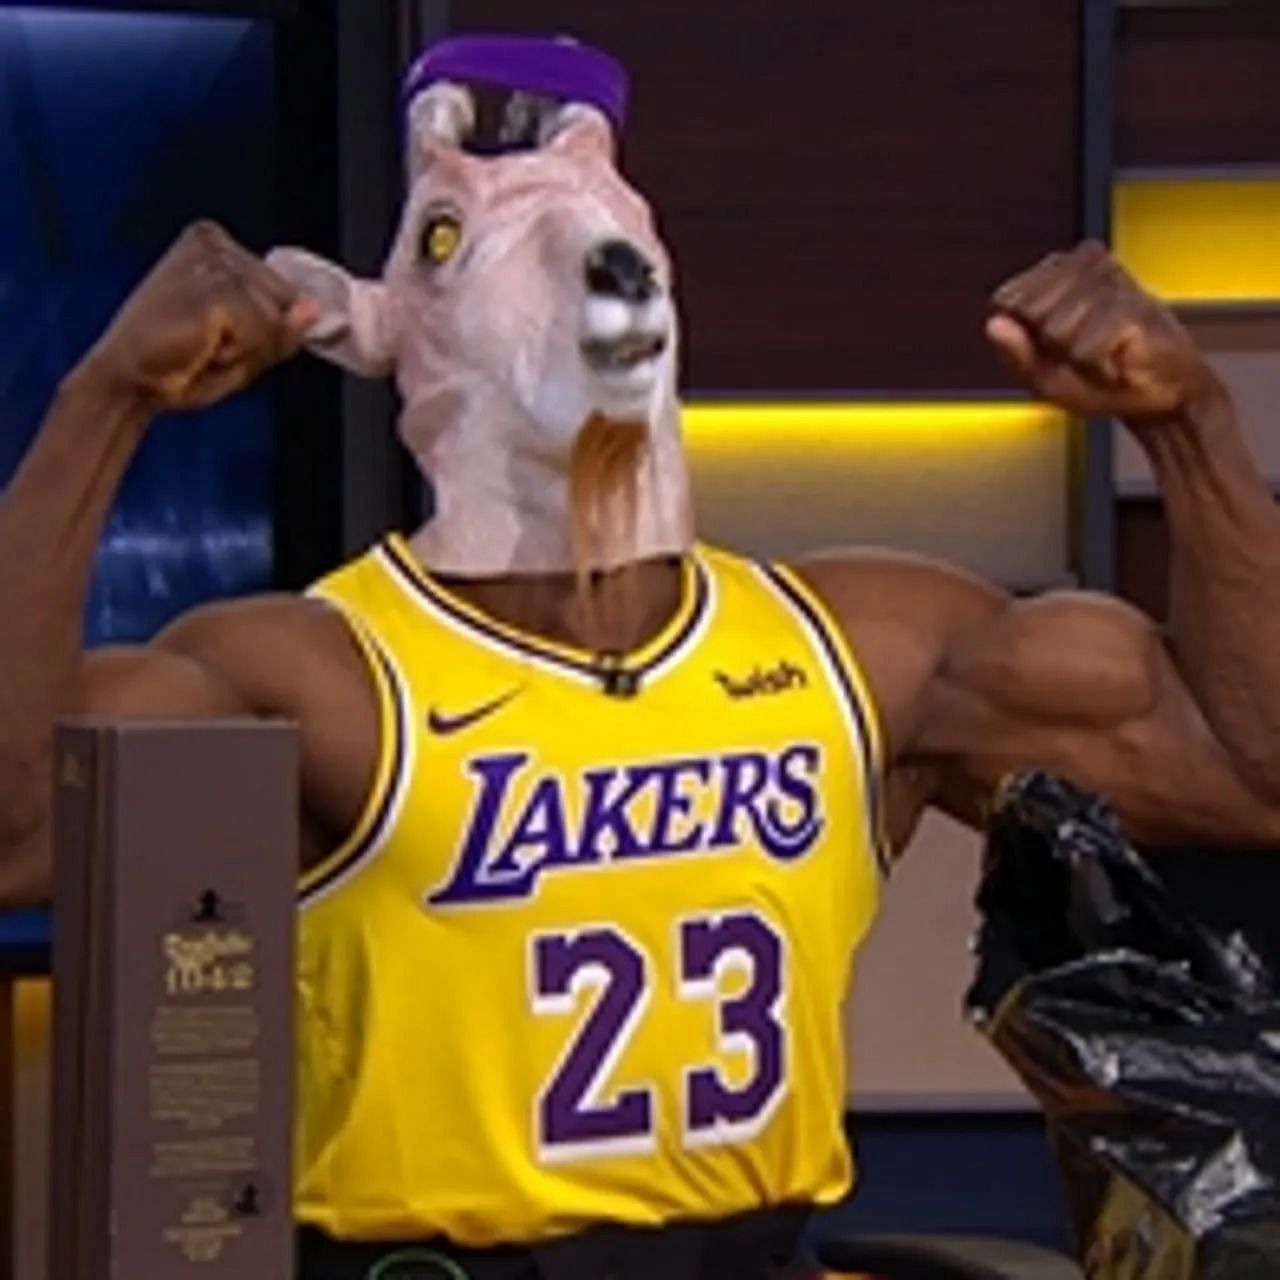 Sharpe wearing a goat mask and James Laker jersey on Undisputed. Source: Fox Sports